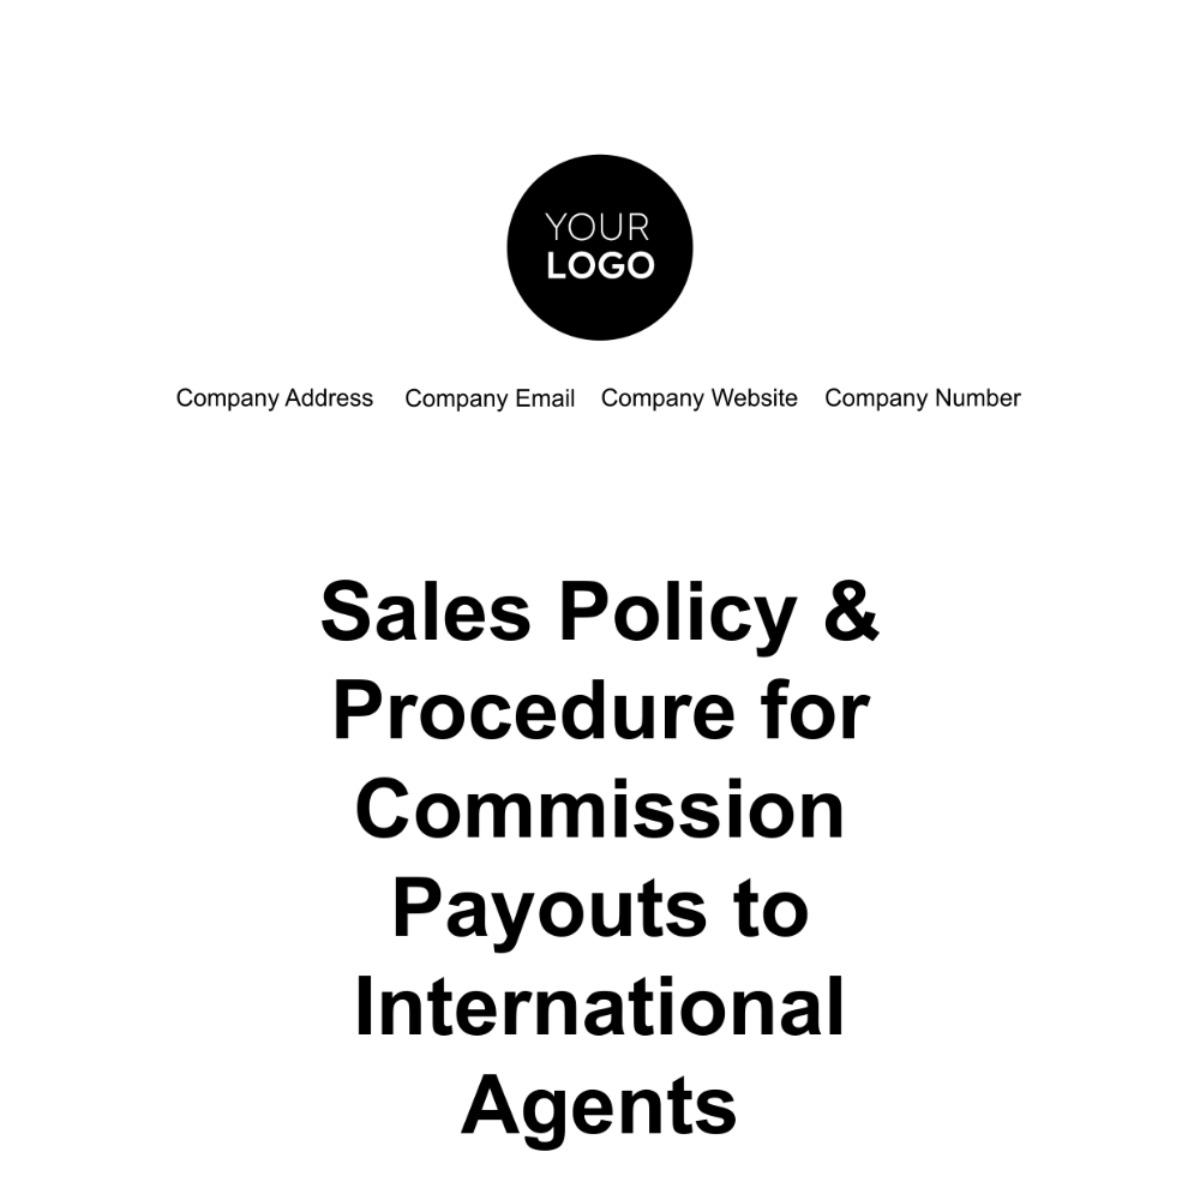 Sales Policy & Procedure for Commission Payouts to International Agents Template